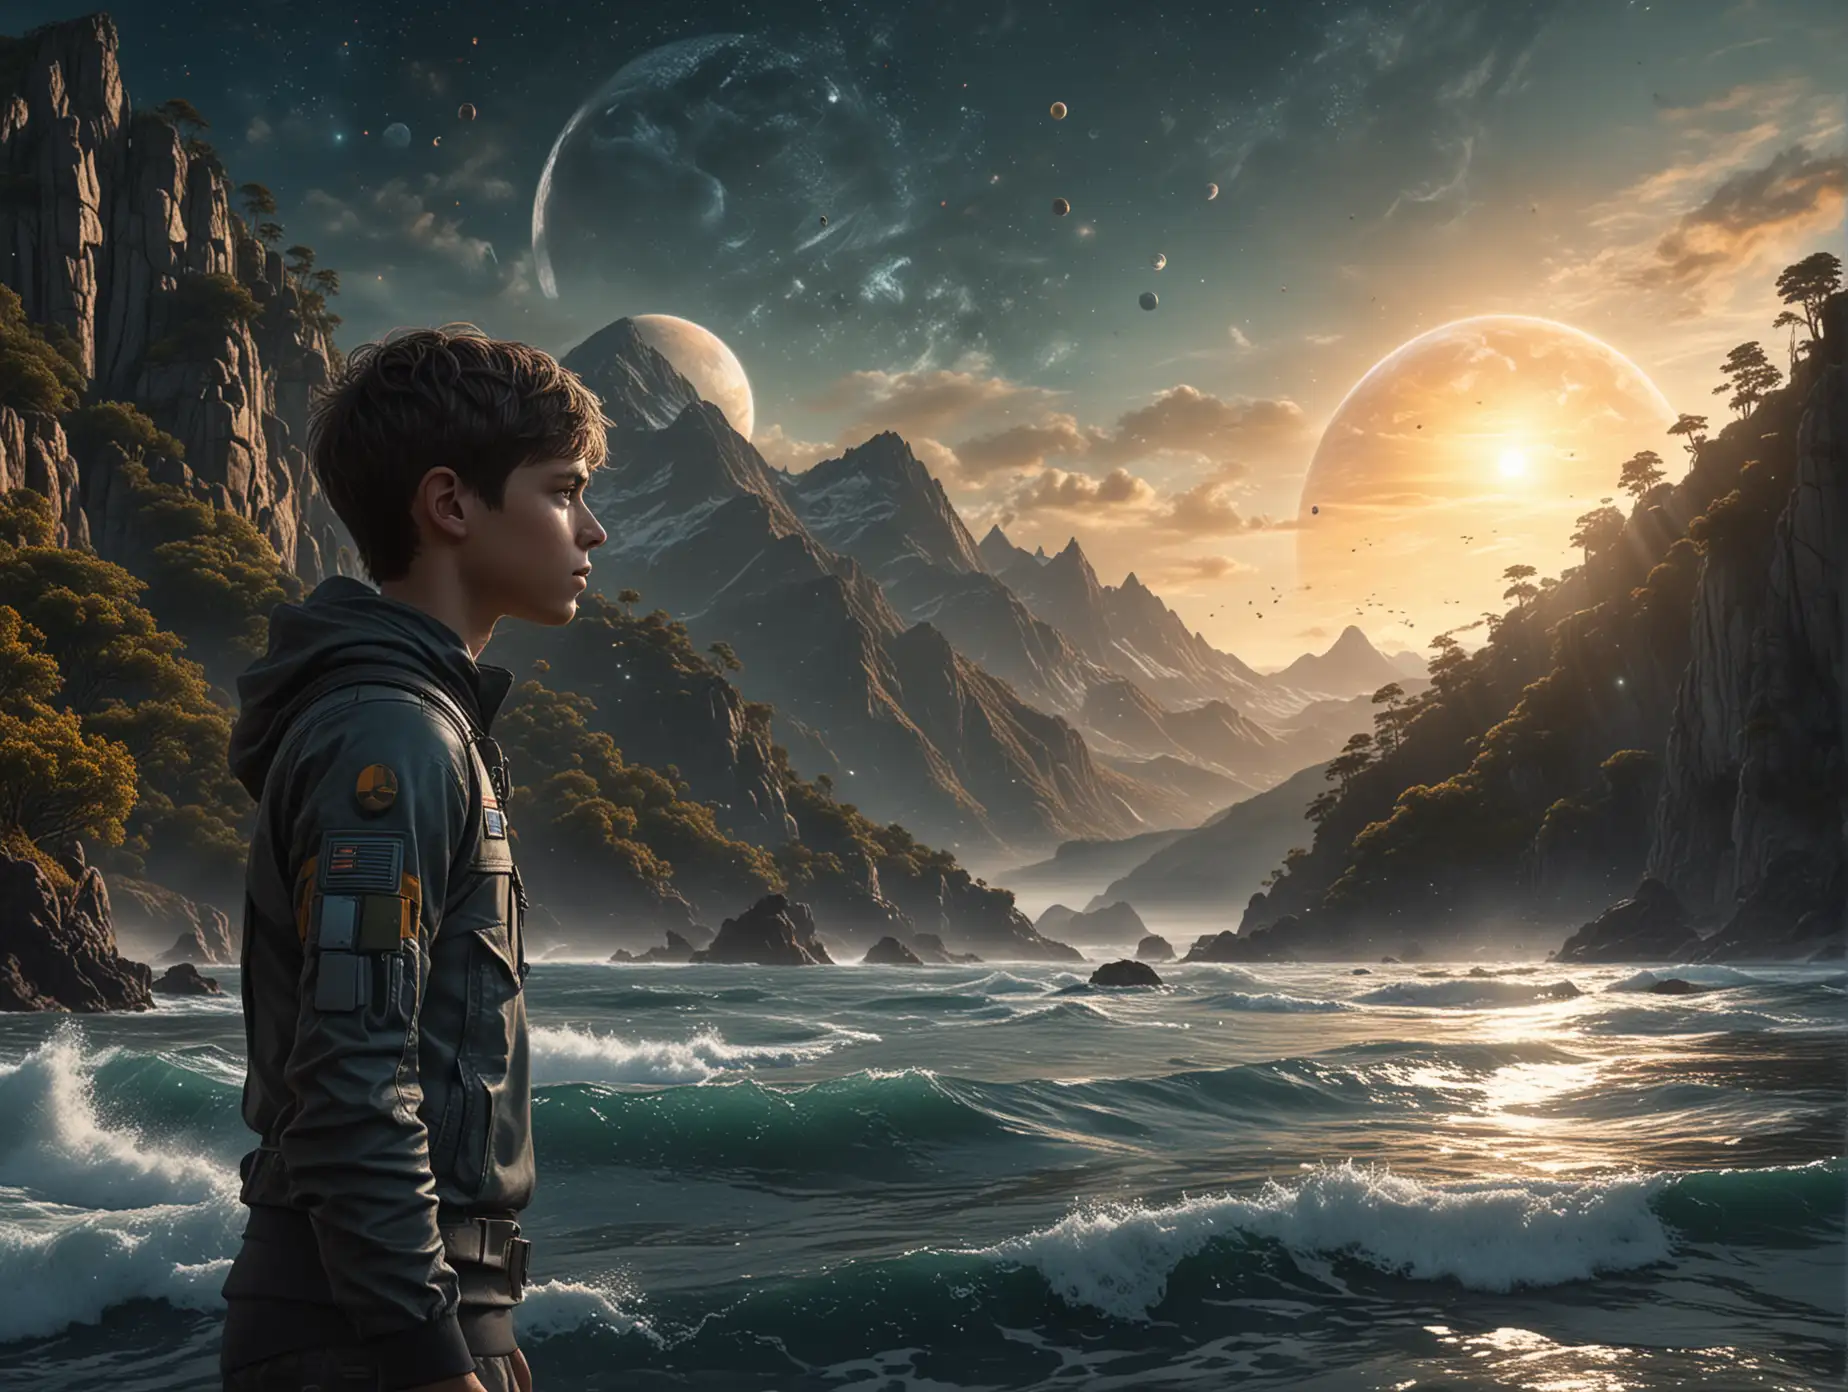 Fantastical-Boy-in-Profile-with-Ocean-and-Space-Landscape